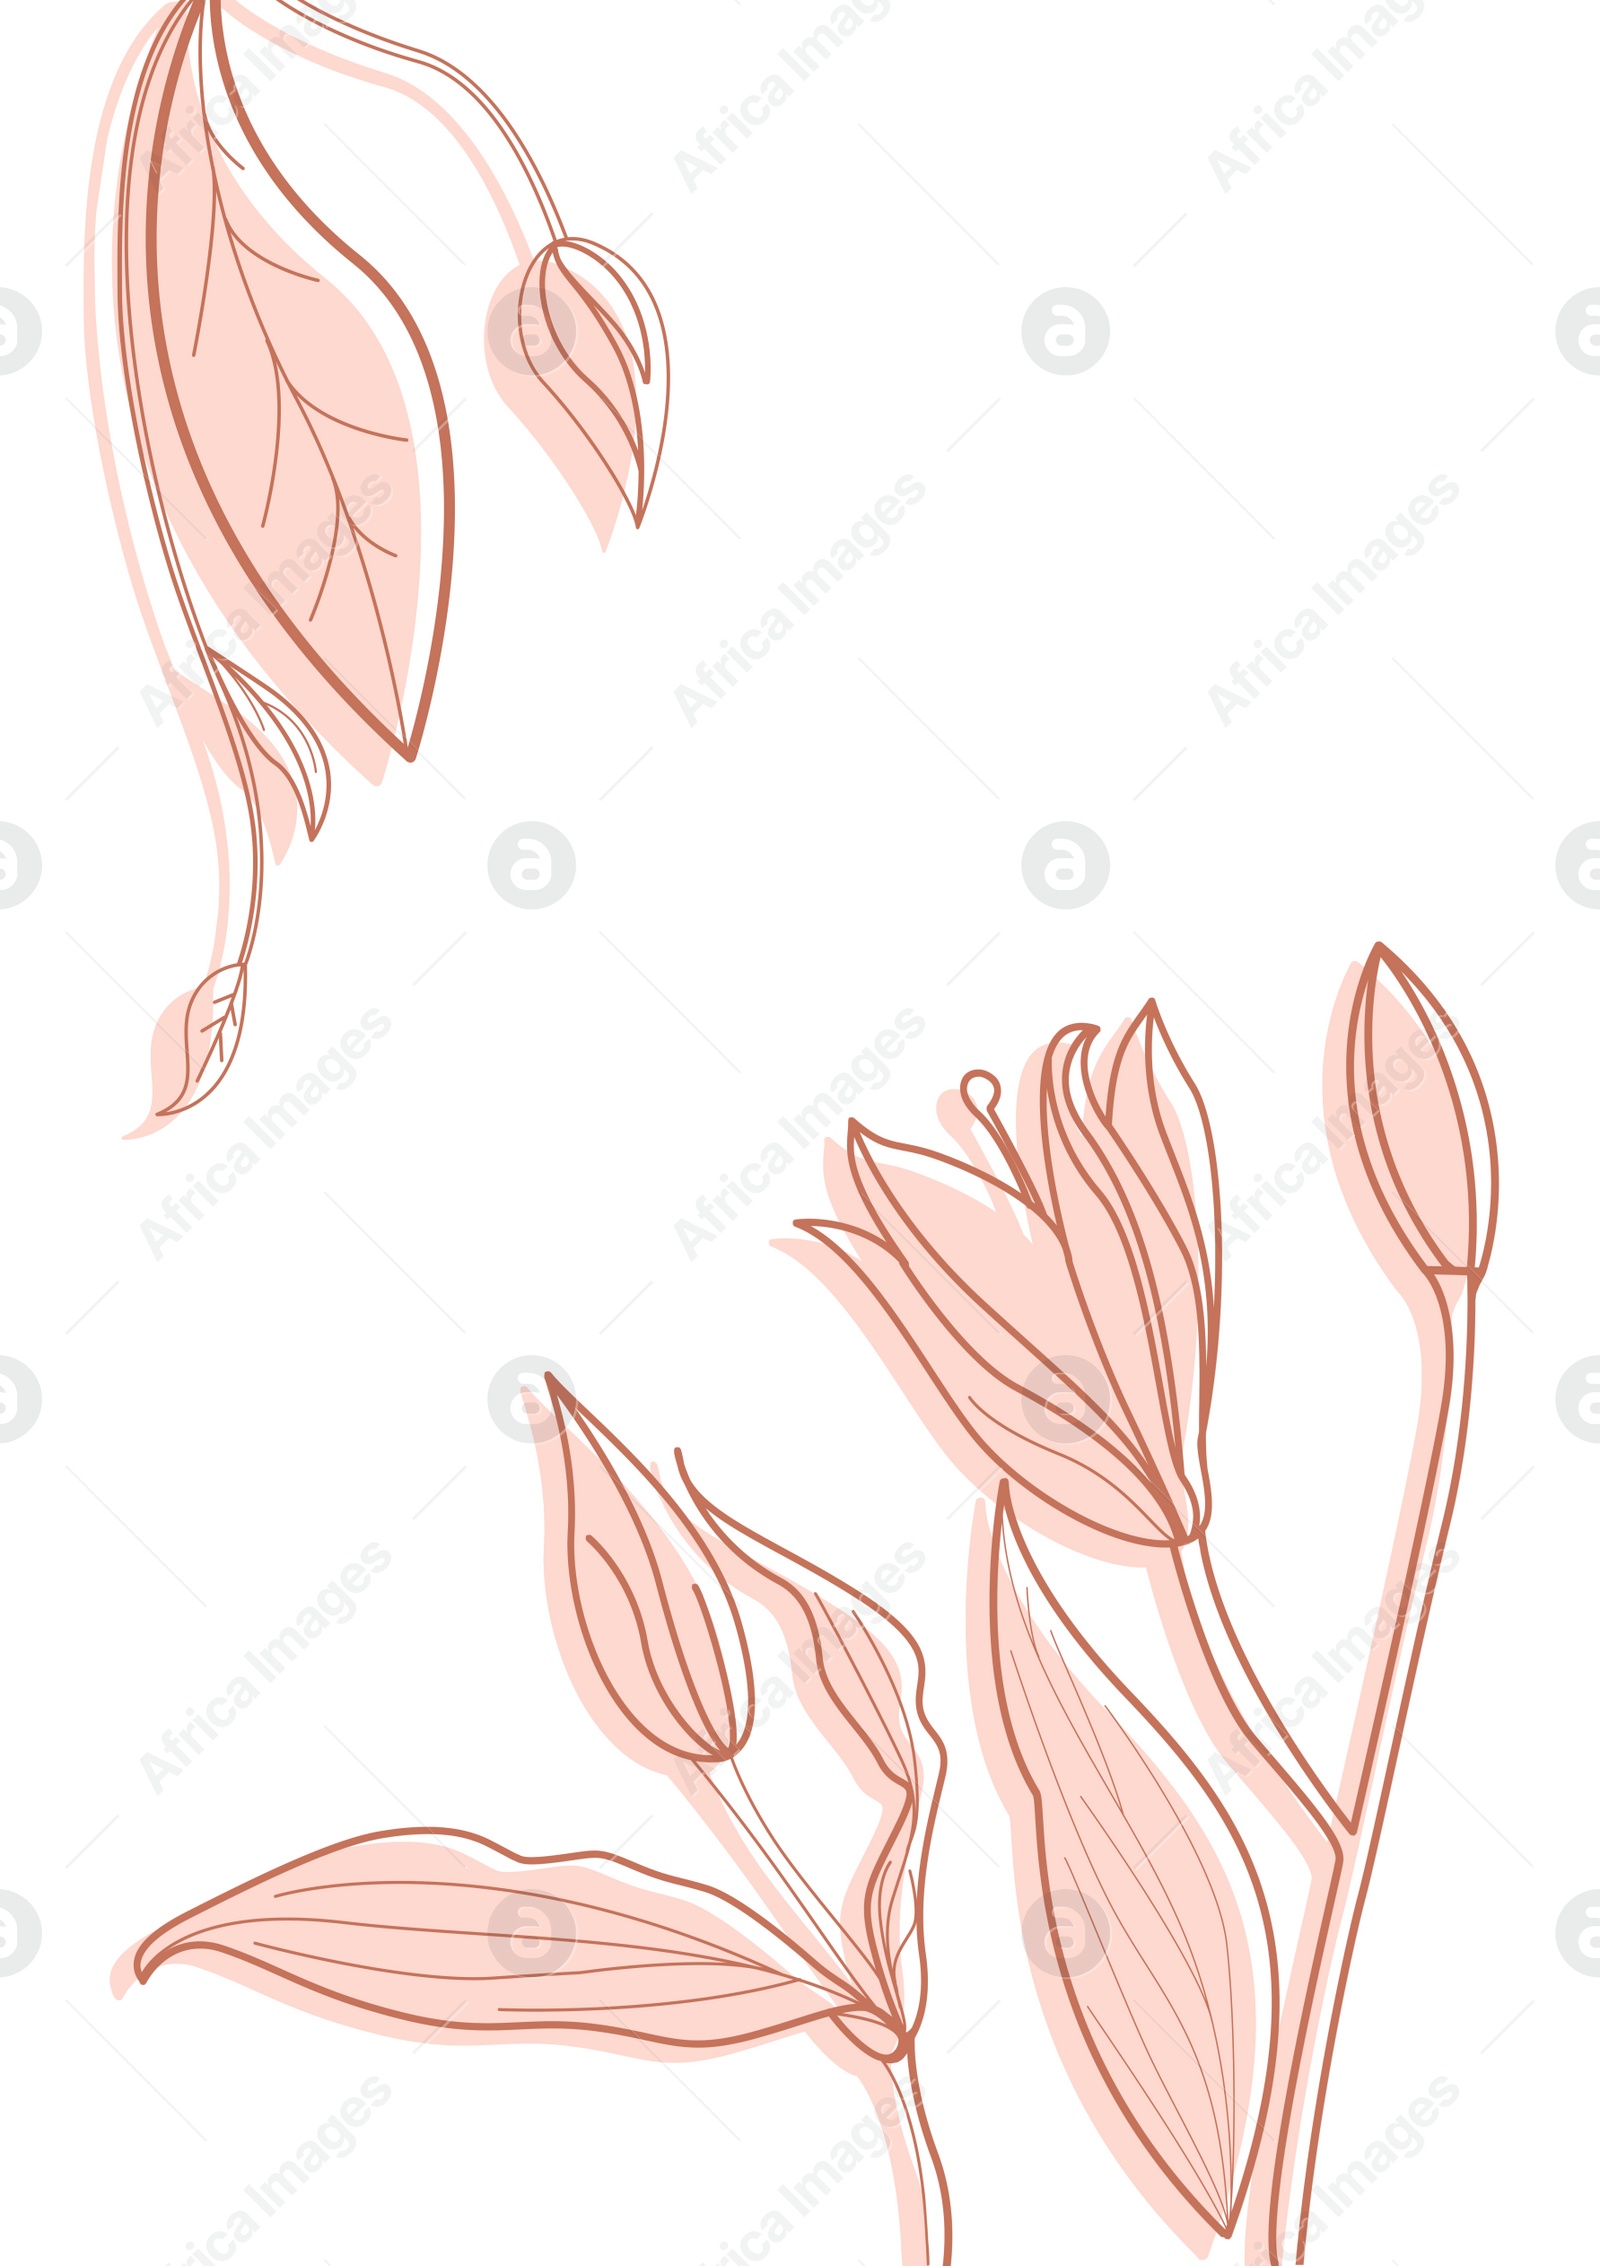 Illustration of Beautiful image with flowers in different colors. Floral design